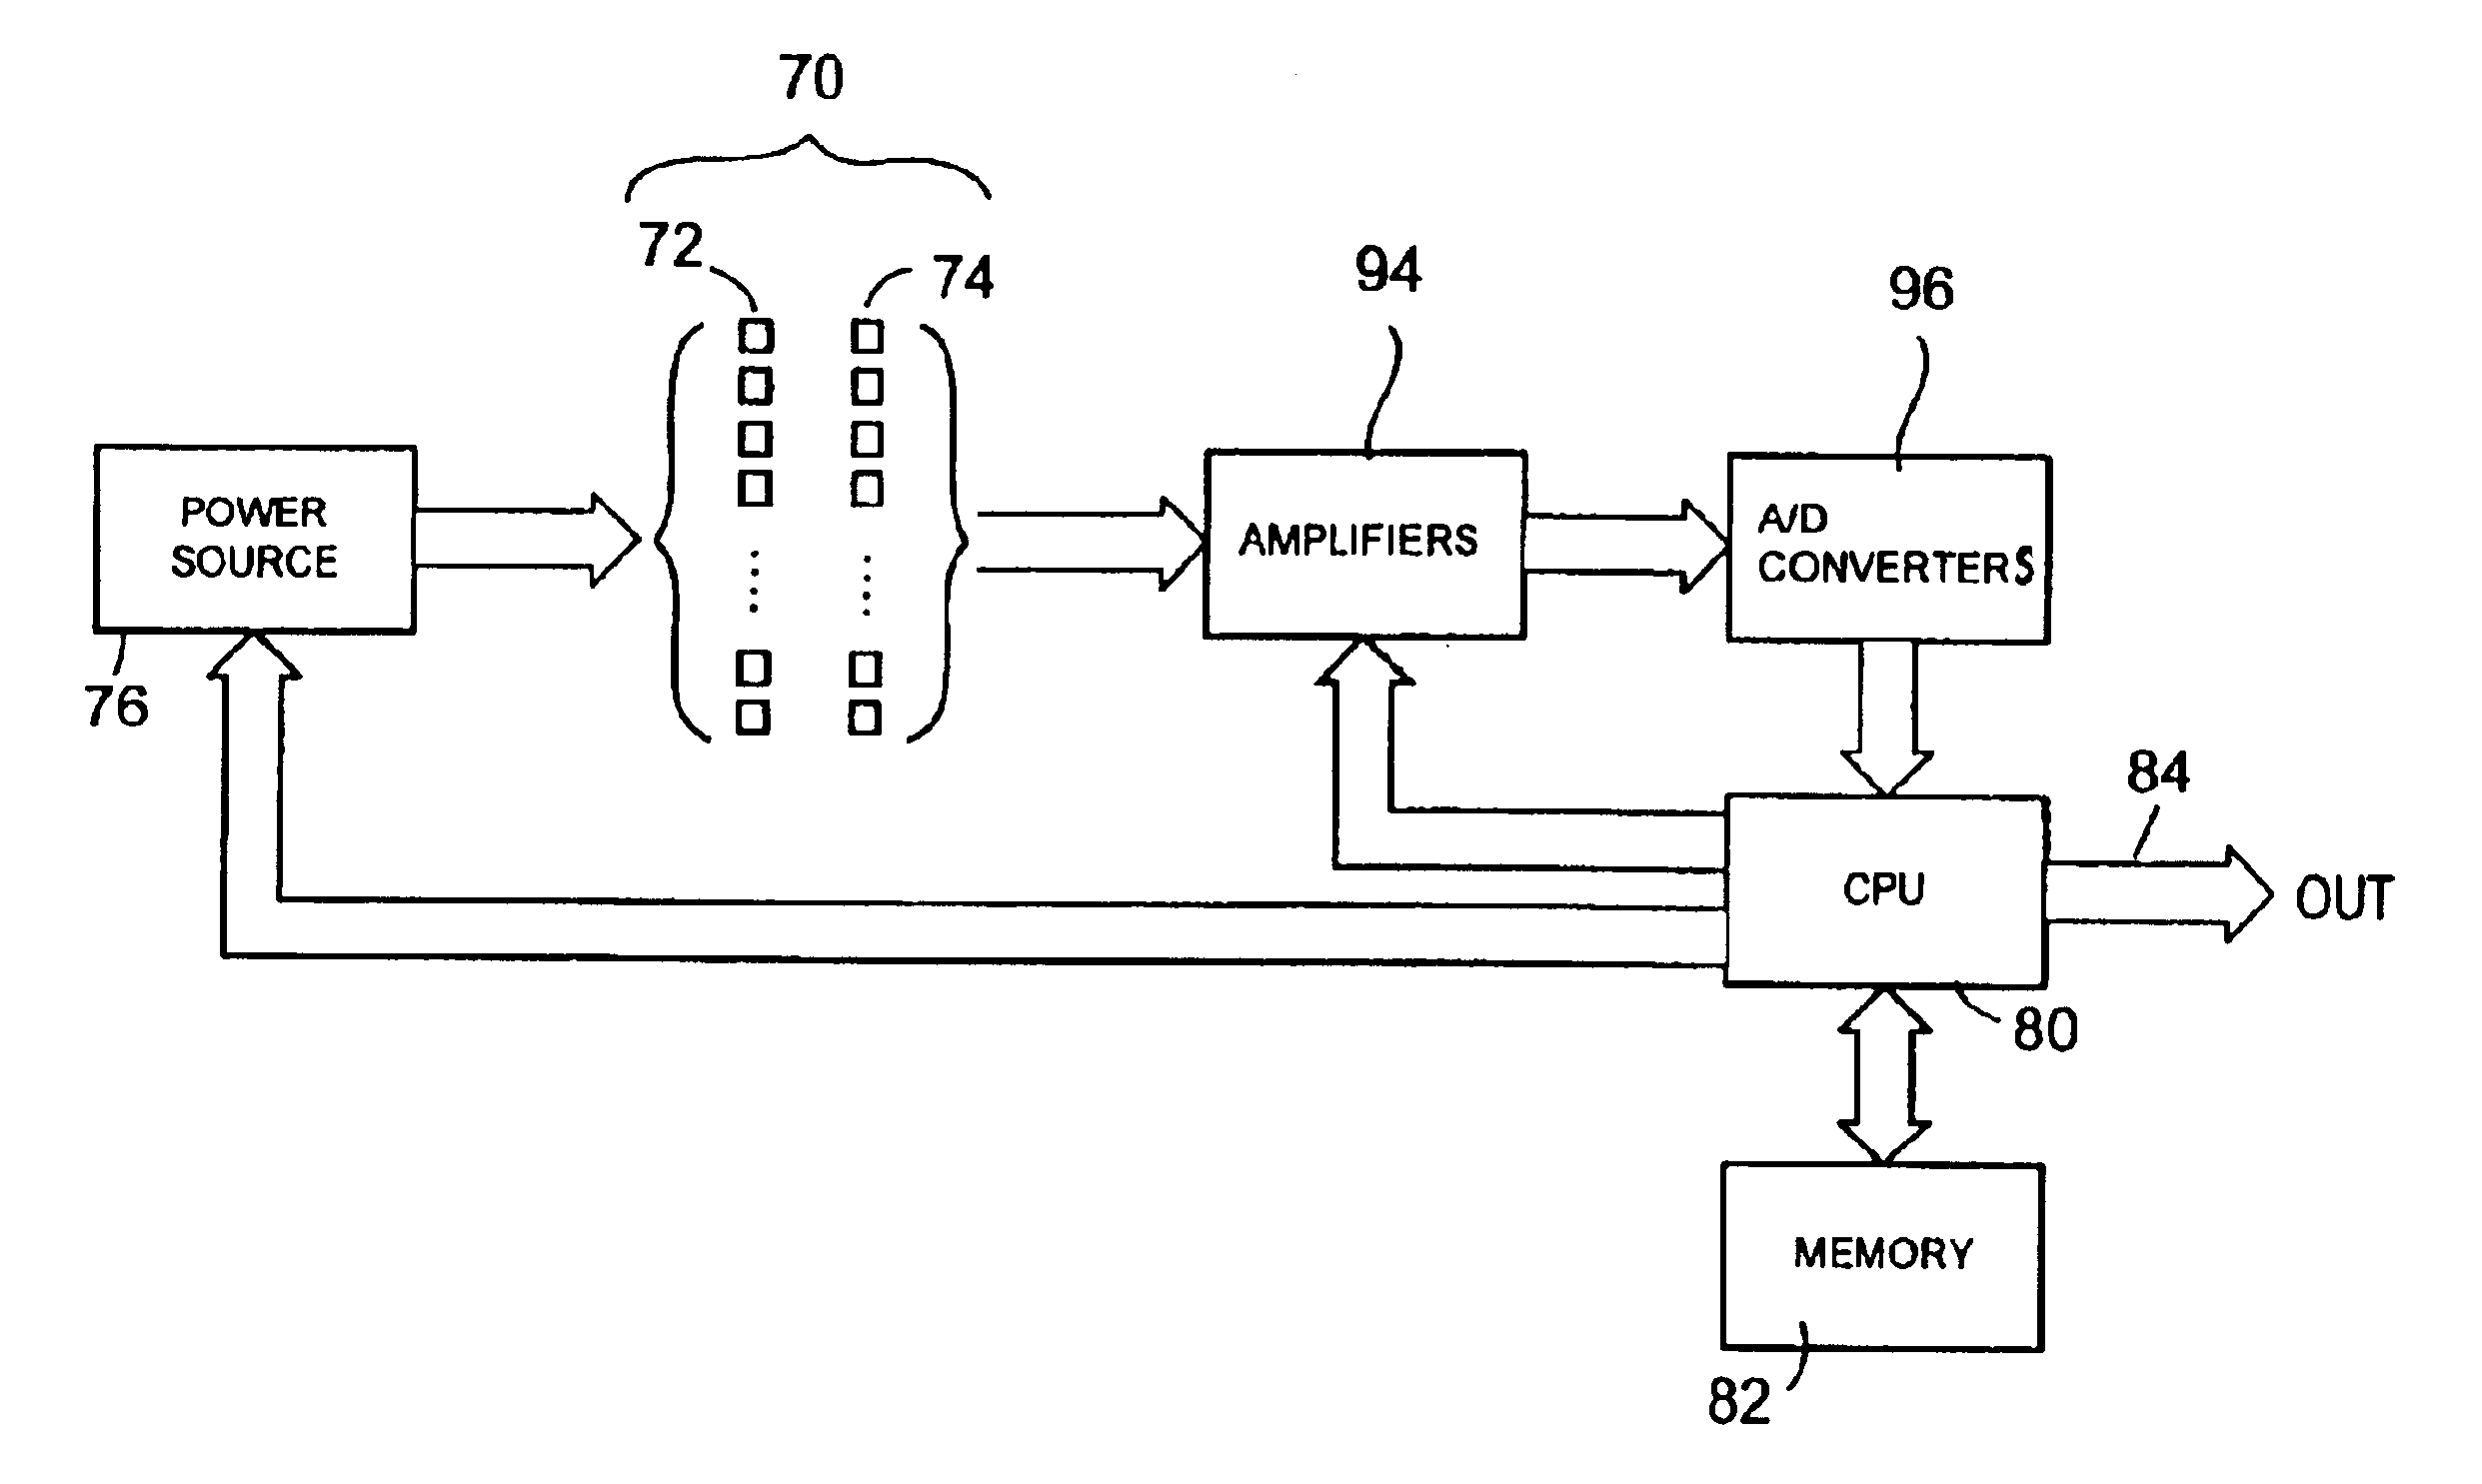 Equalization for a multi-axis imaging system